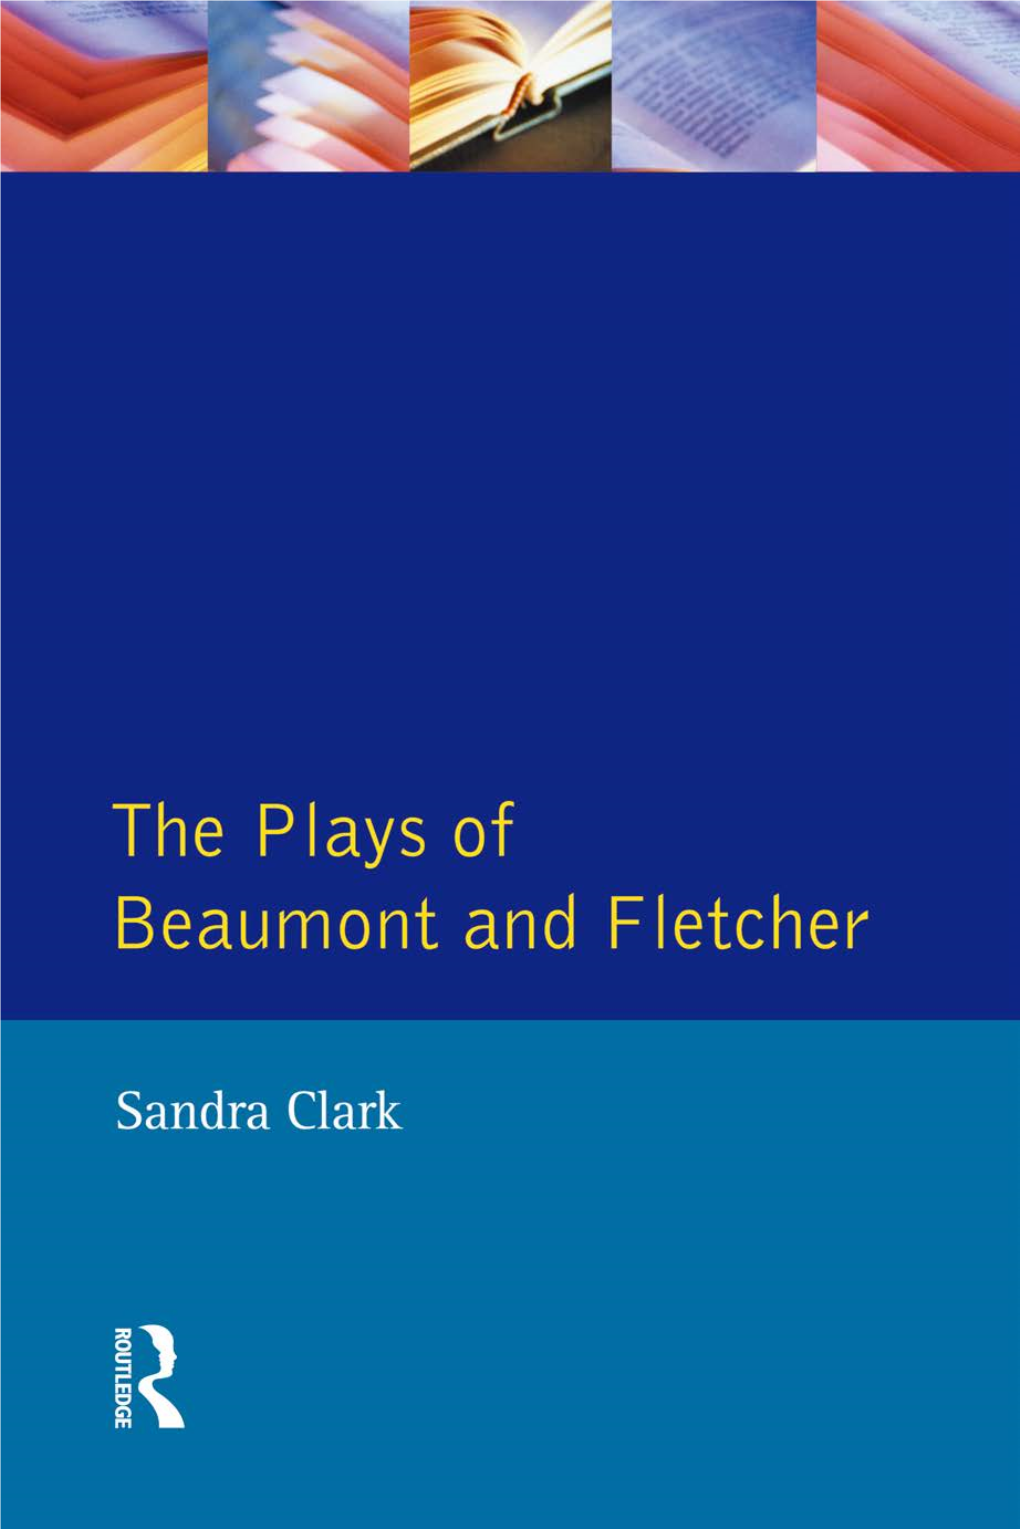 The Plays of Beaumont and Fletcher Drawn - Often, but Not Exclusively, by Feminists - Between Sexual Themes and Power and Authority